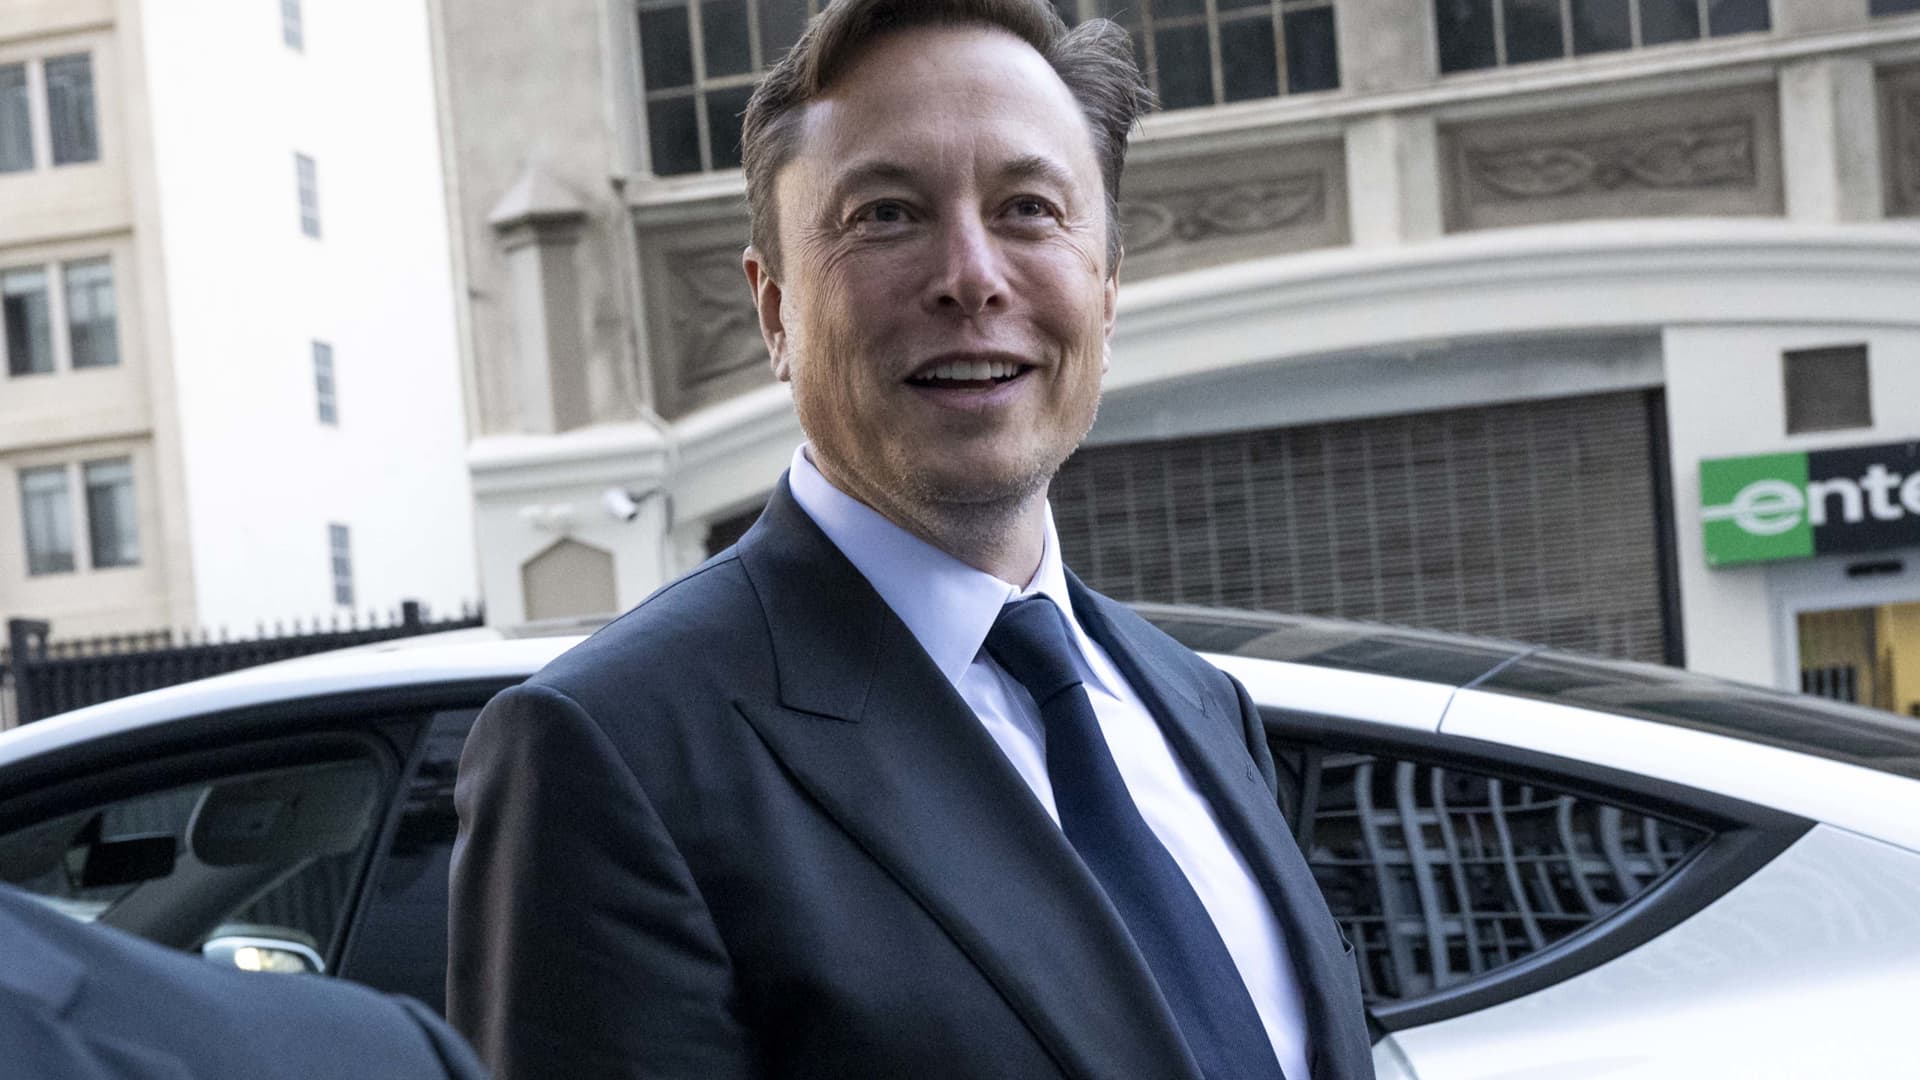 Elon Musk, chief executive officer of Tesla Inc., departs court in San Francisco, California, on Tuesday, Jan. 24, 2023.